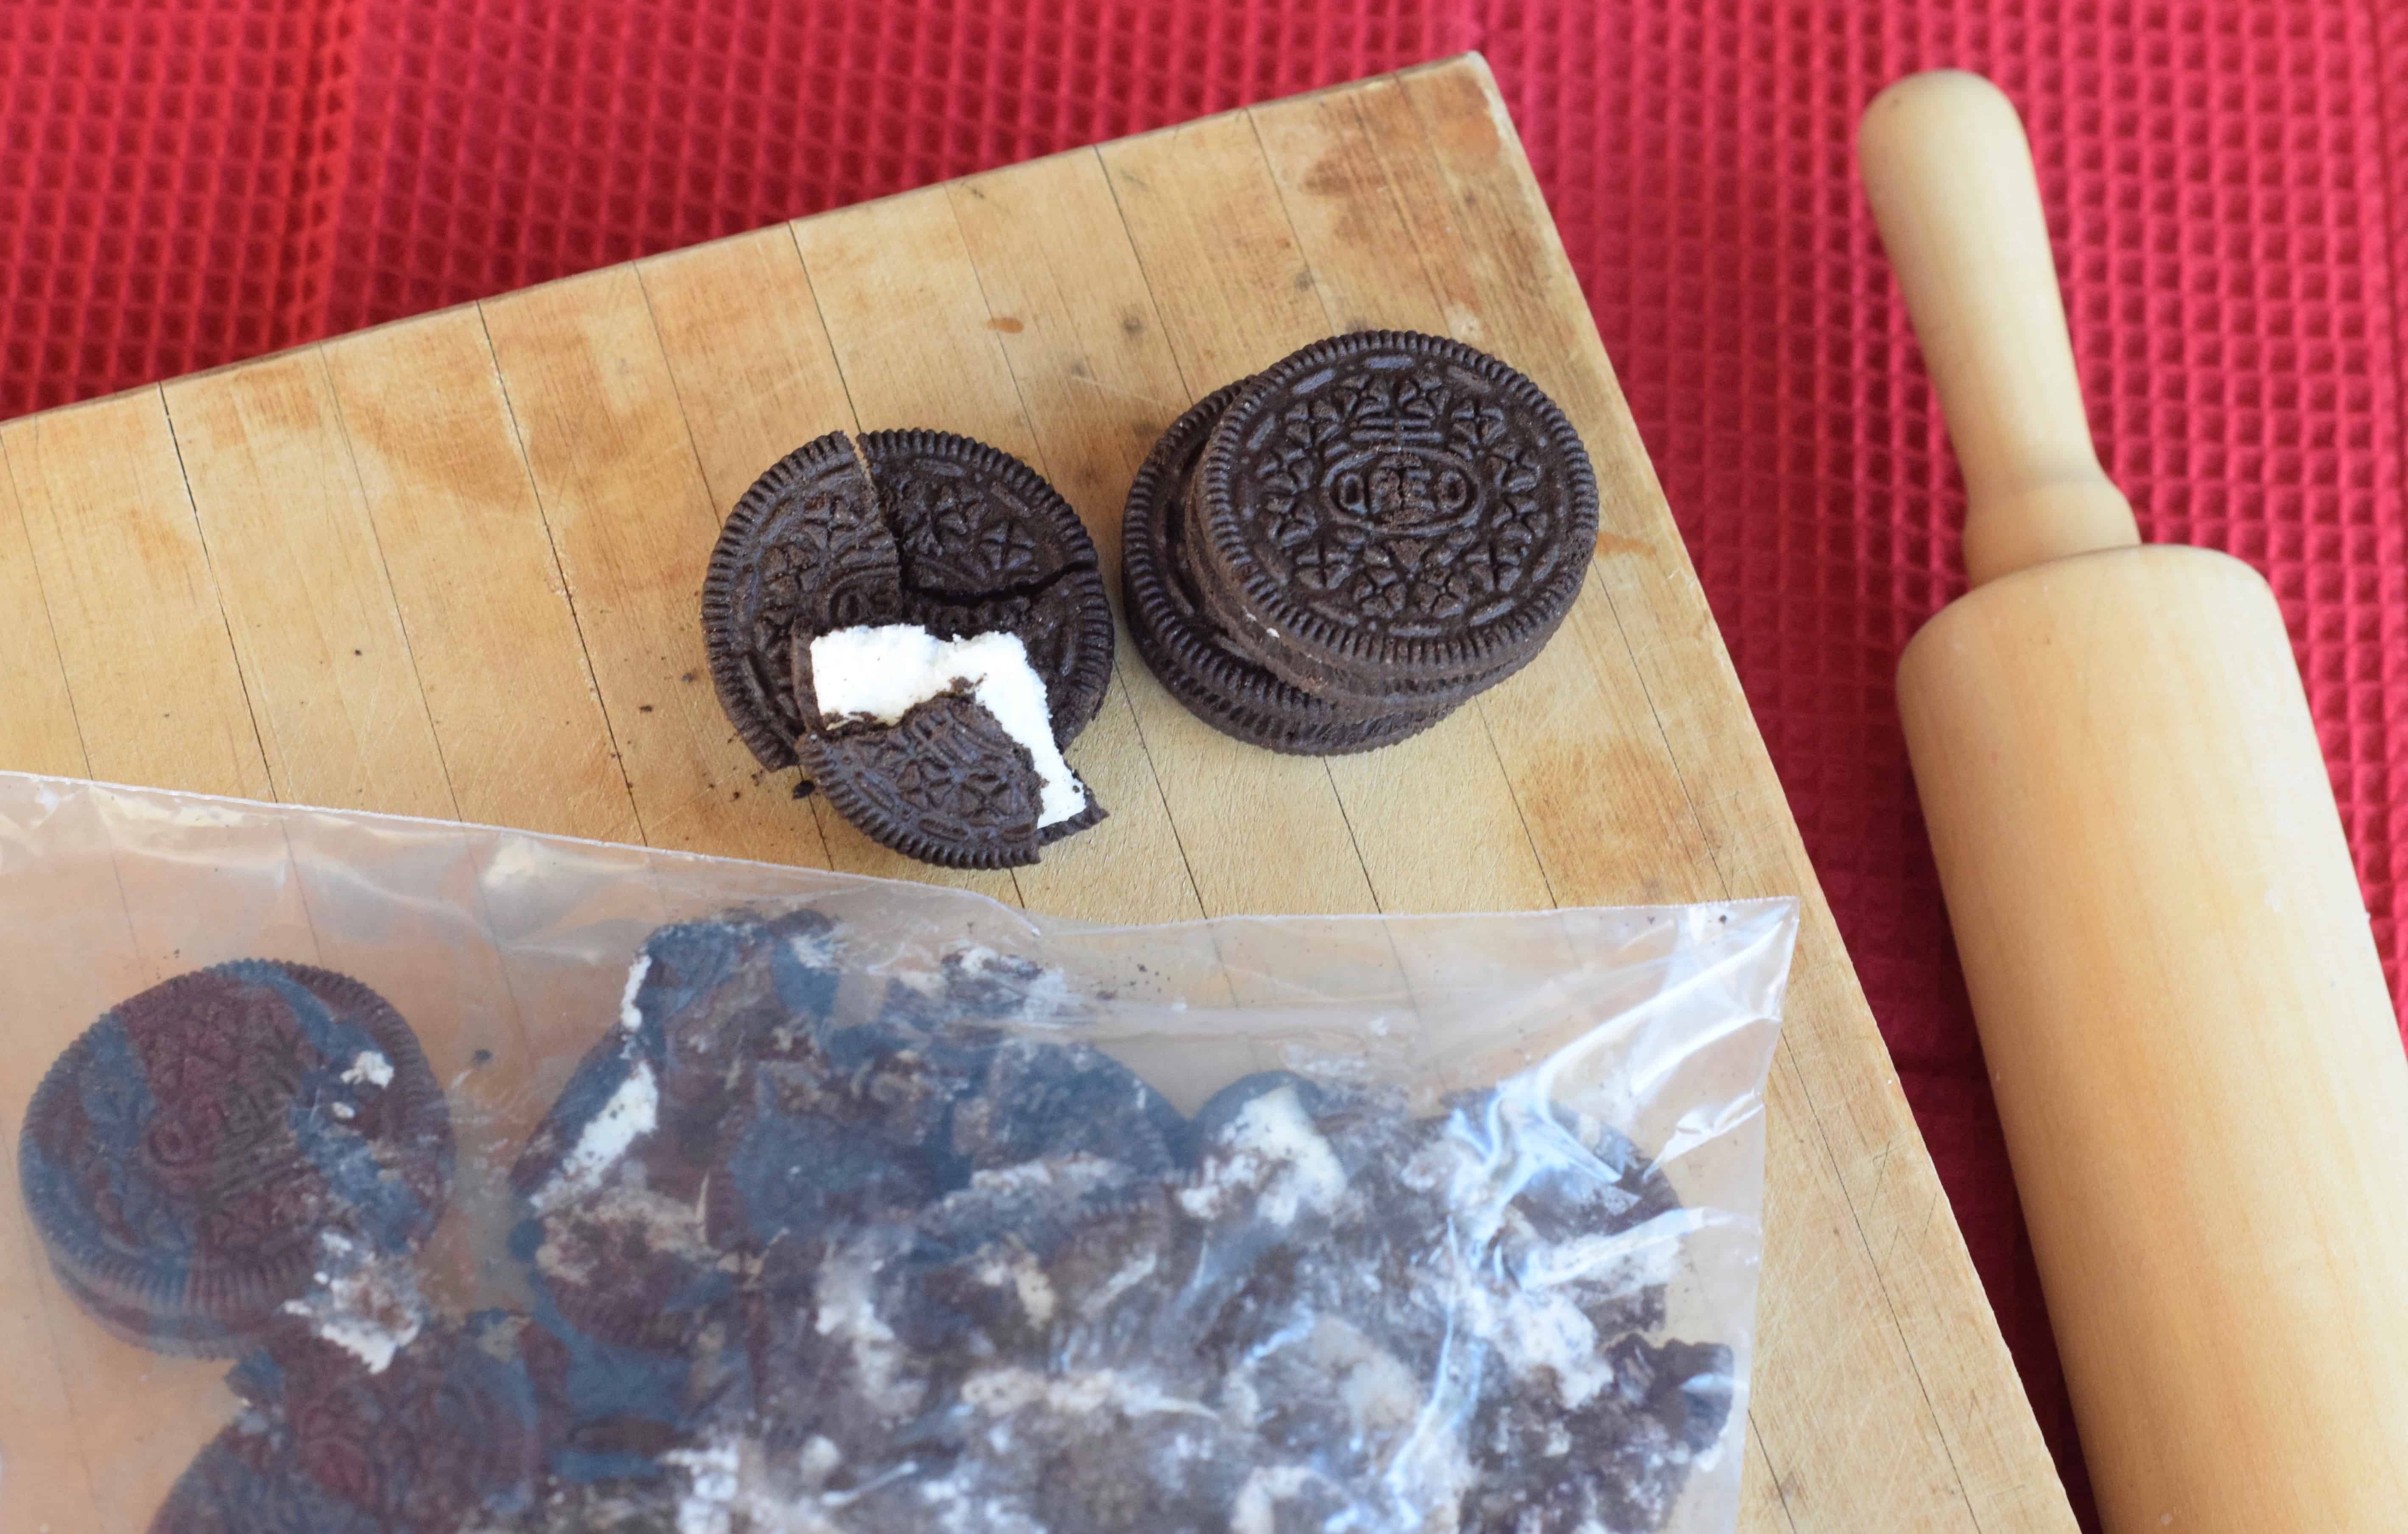 Cookies 'n Cream White Chocolate Fudge. Crush Oreo cookies with a rolling pin in a zip top bag